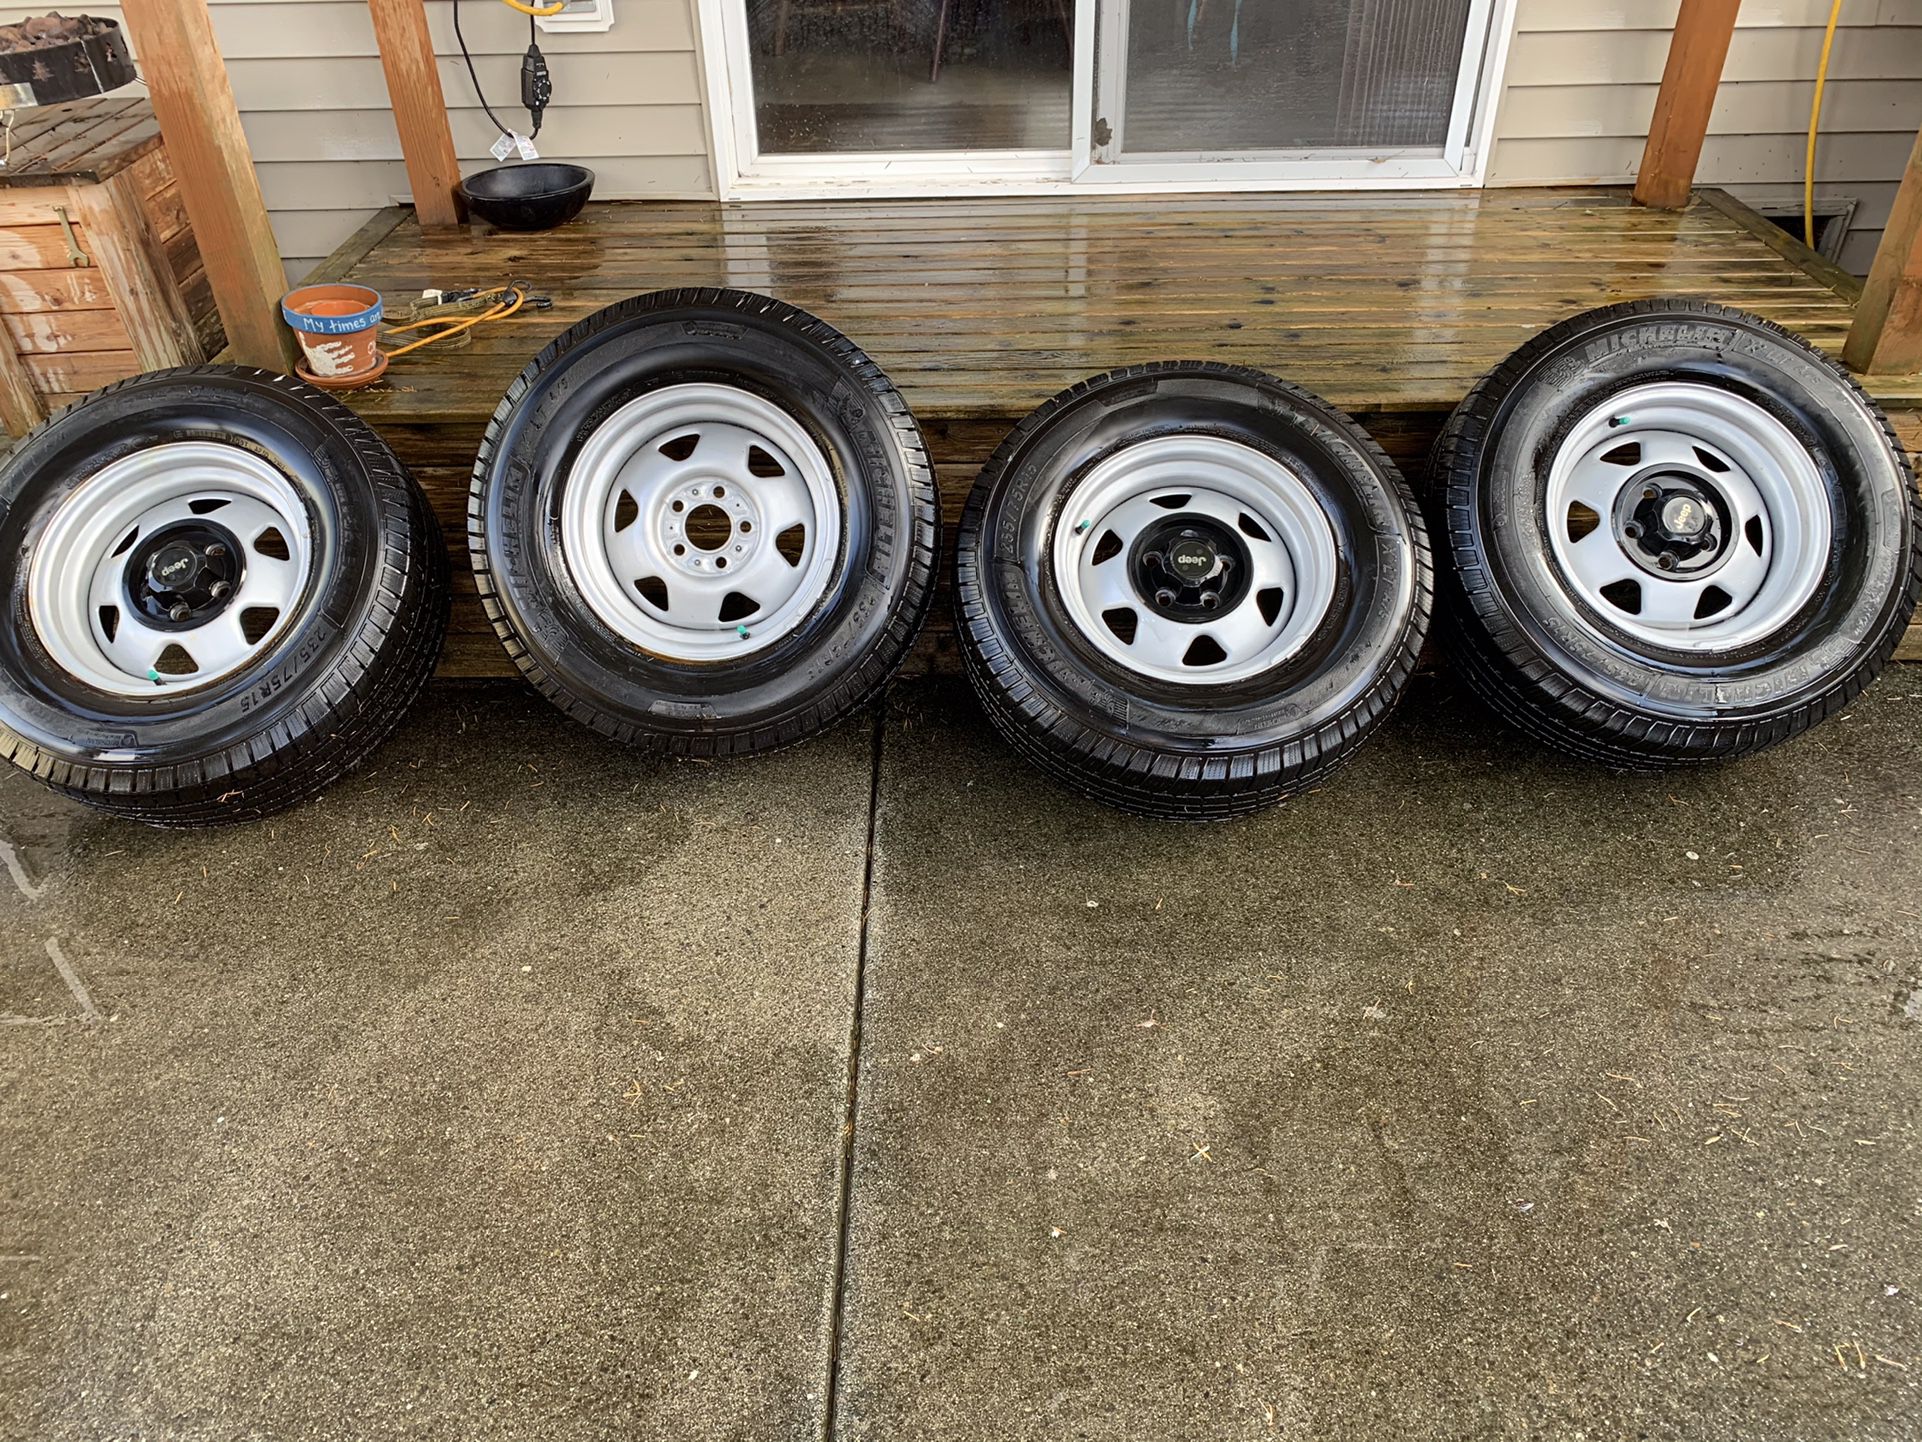 235/75/15 Michelin Tires On Jeep Wheels - Sale Pending.